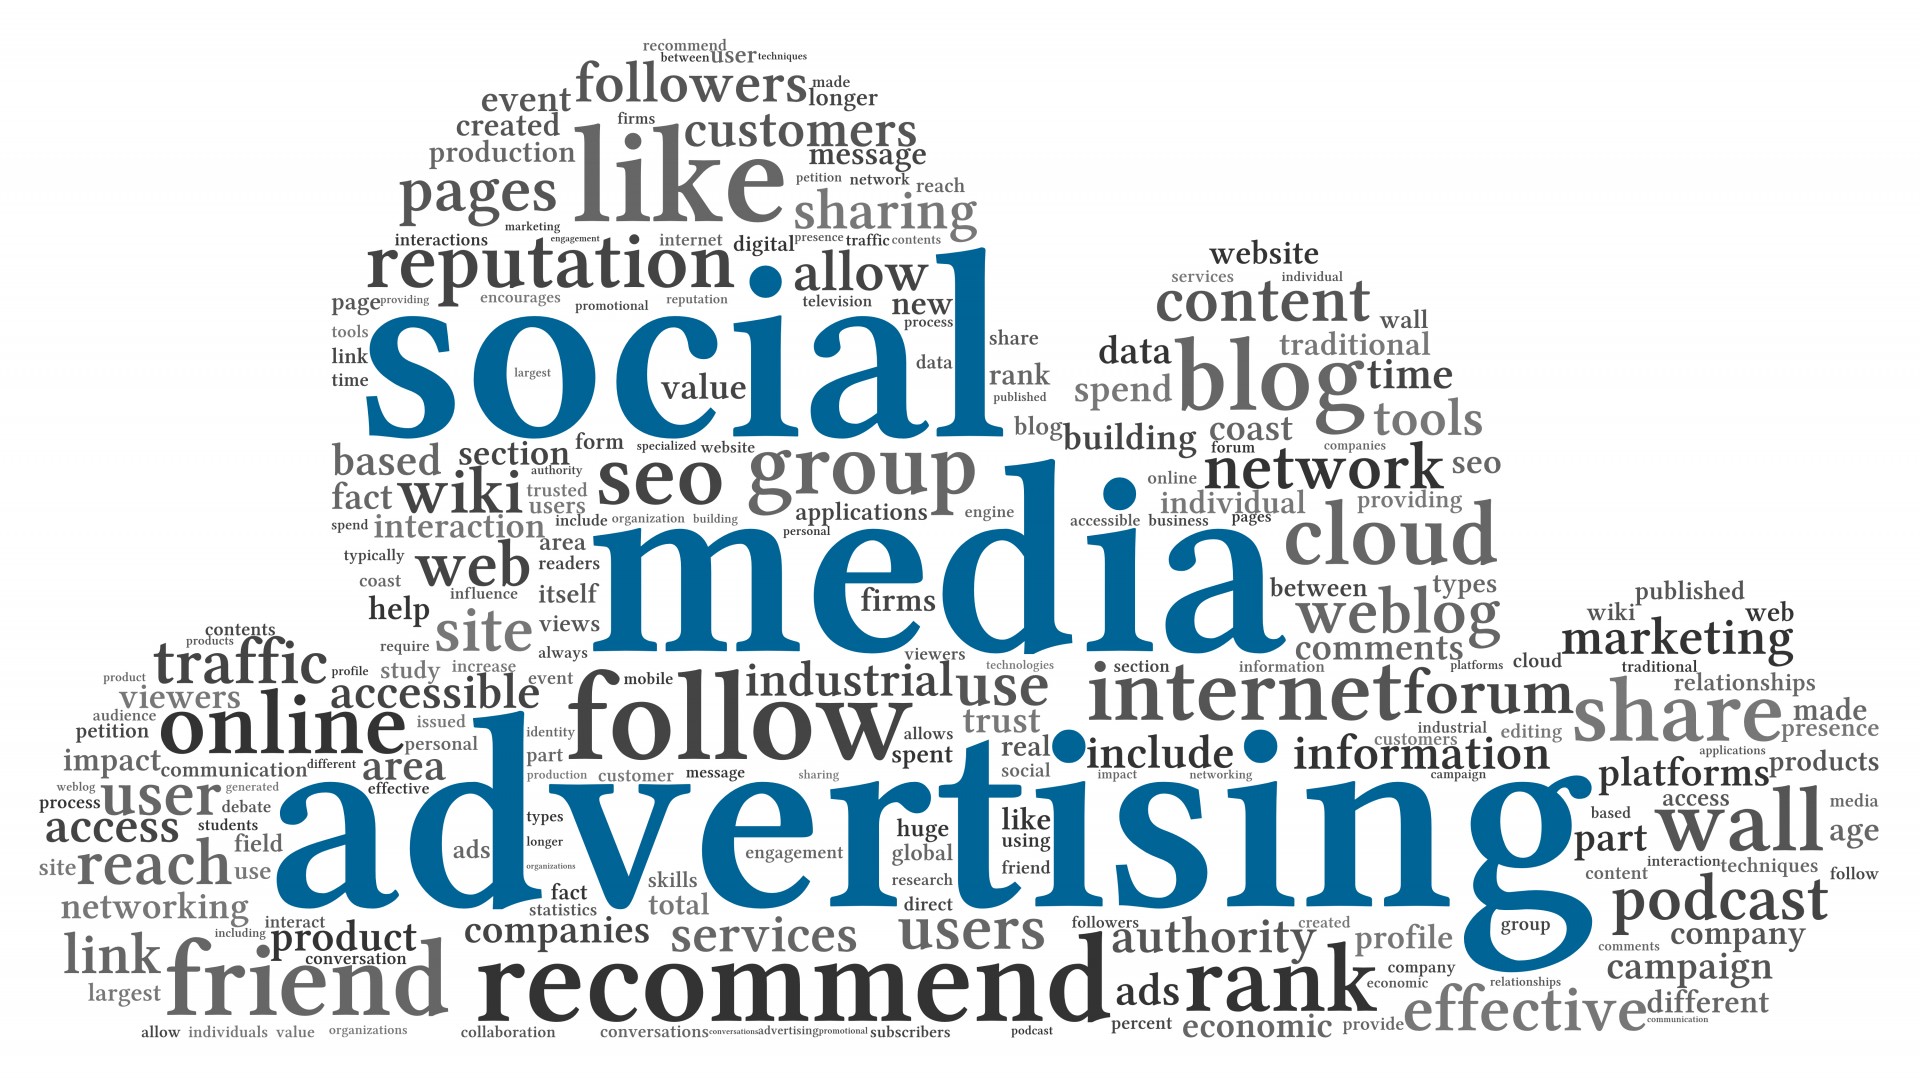 Your guide to social media advertising